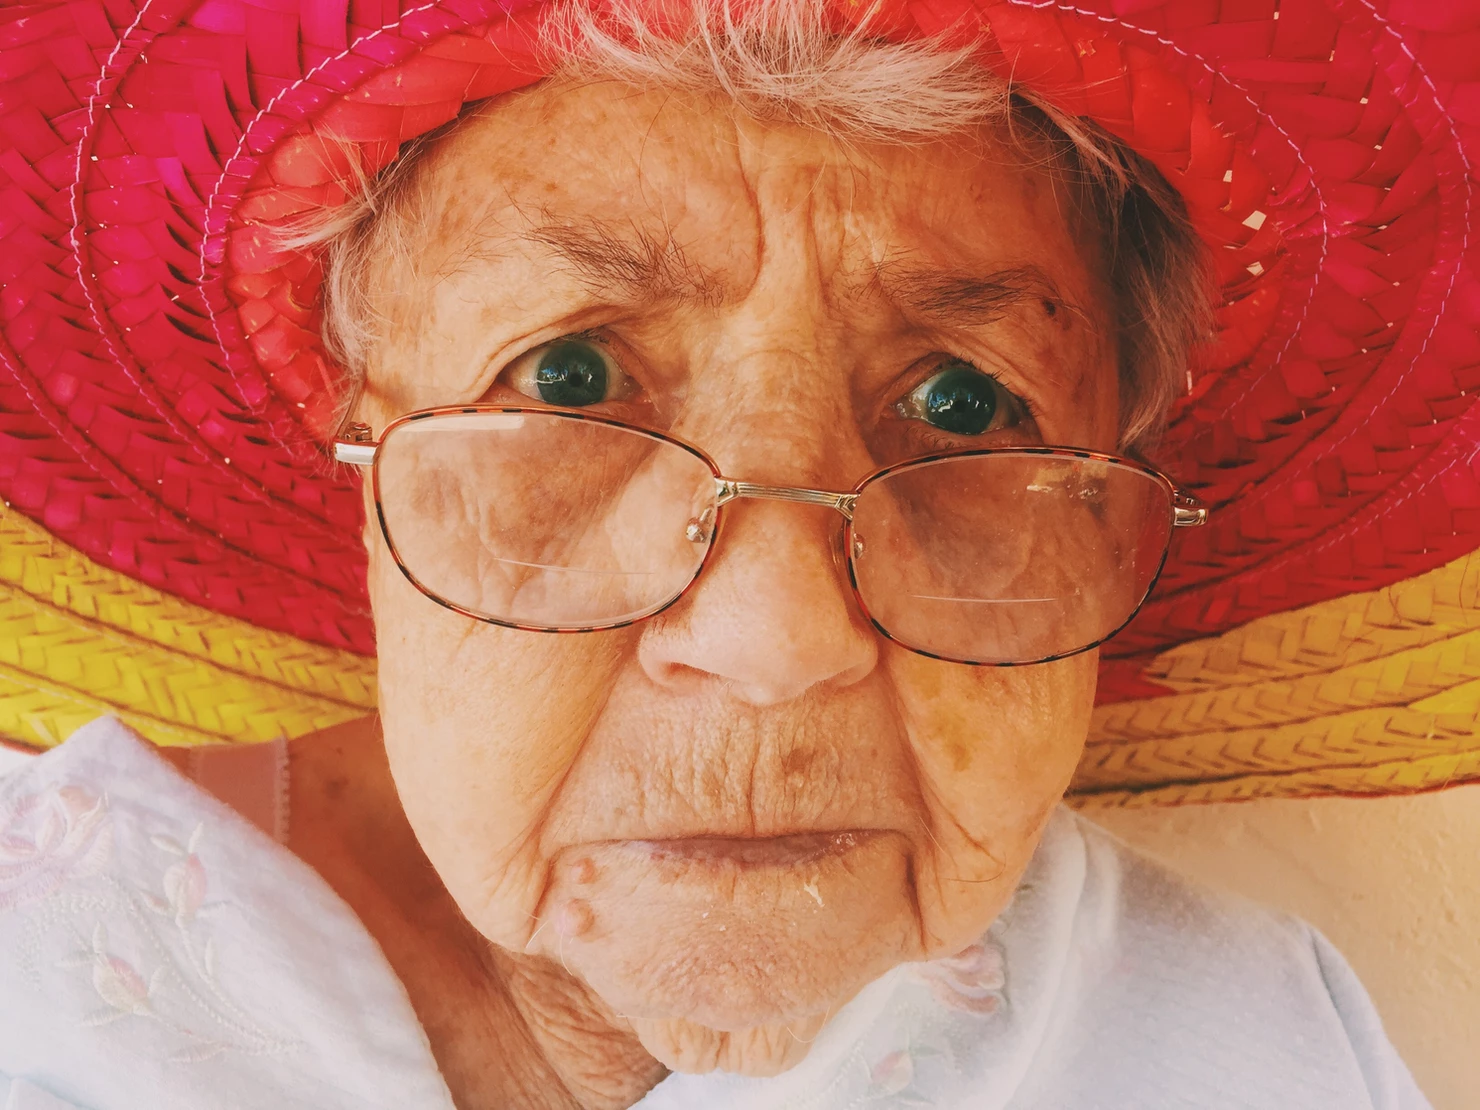 Elderly woman with red and yellow hat and glasses looking worriedElderly woman with red and yellow hat and glasses looking worried